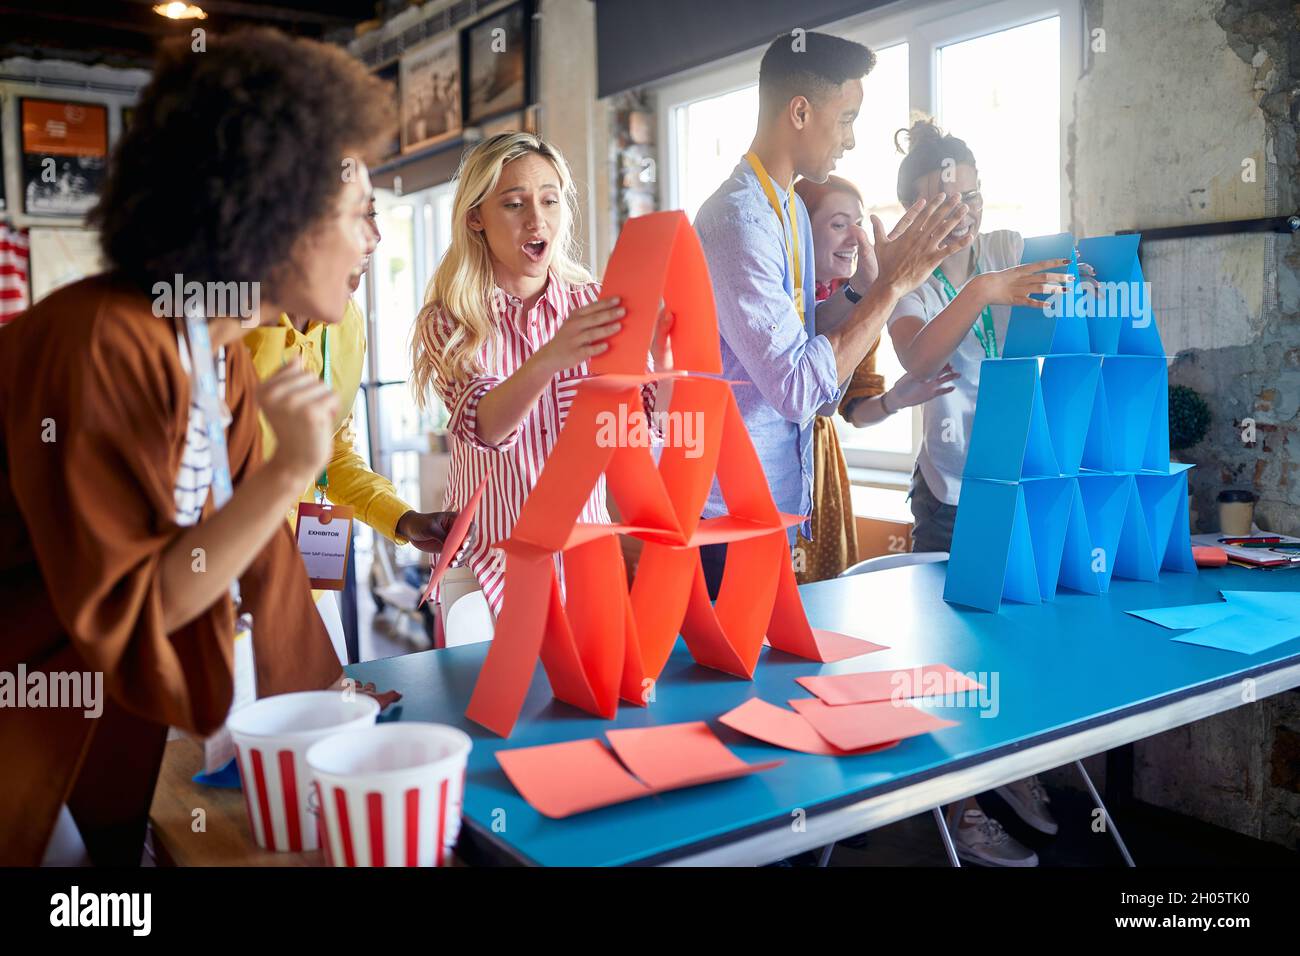 group of employees are competing in faster building paper towers at work, having fun Stock Photo